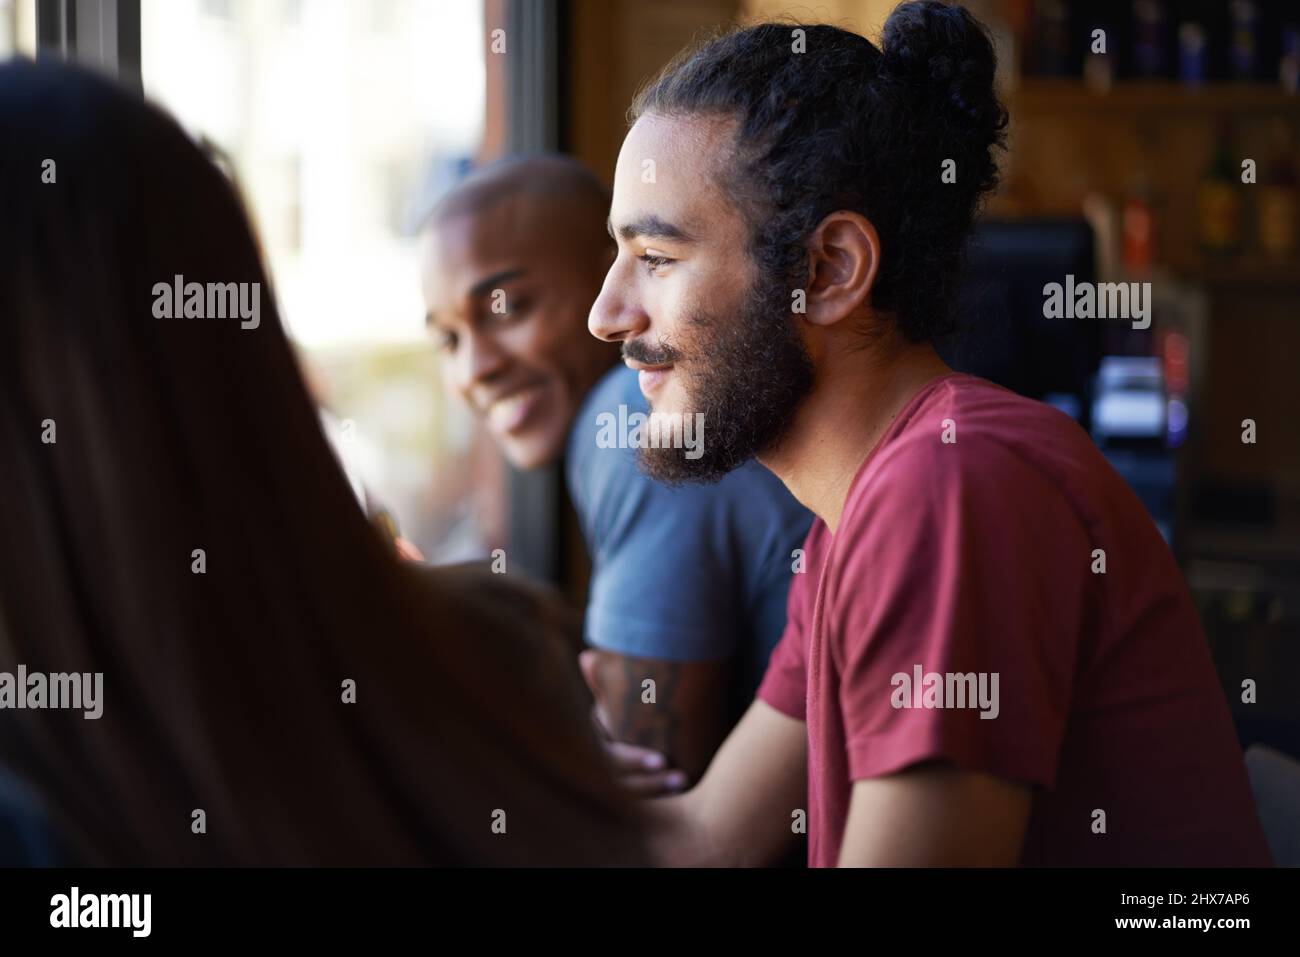 Friends and a cold one - life is good. A cropped shot of young friends socializing at a bar. Stock Photo